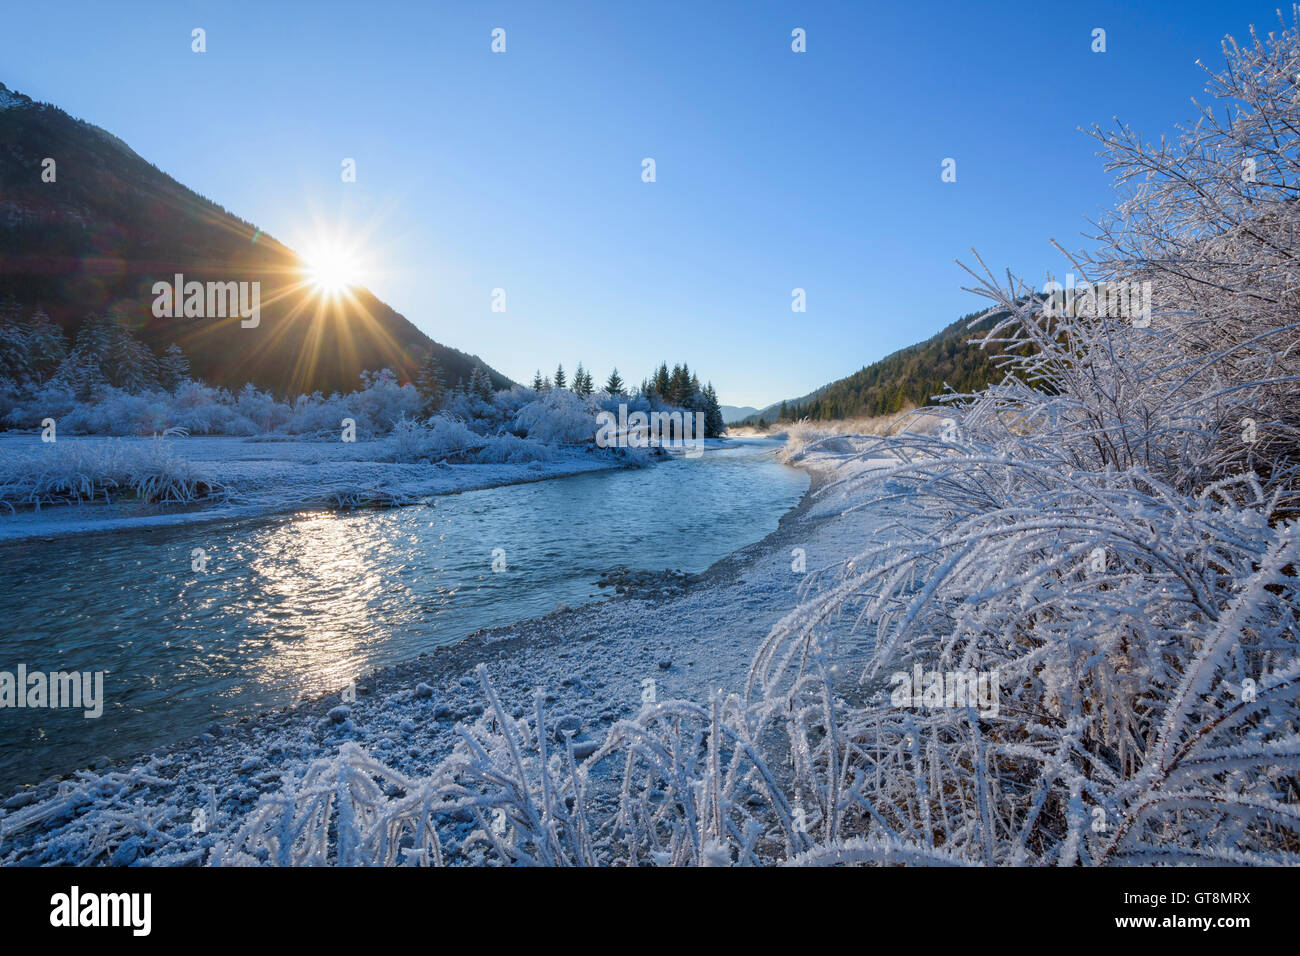 River Isar in Winter with Sun and Hoar Frost, Isar Valley, Karwendel, Vorderriss, Upper Bavaria, Bavaria, Germany Stock Photo